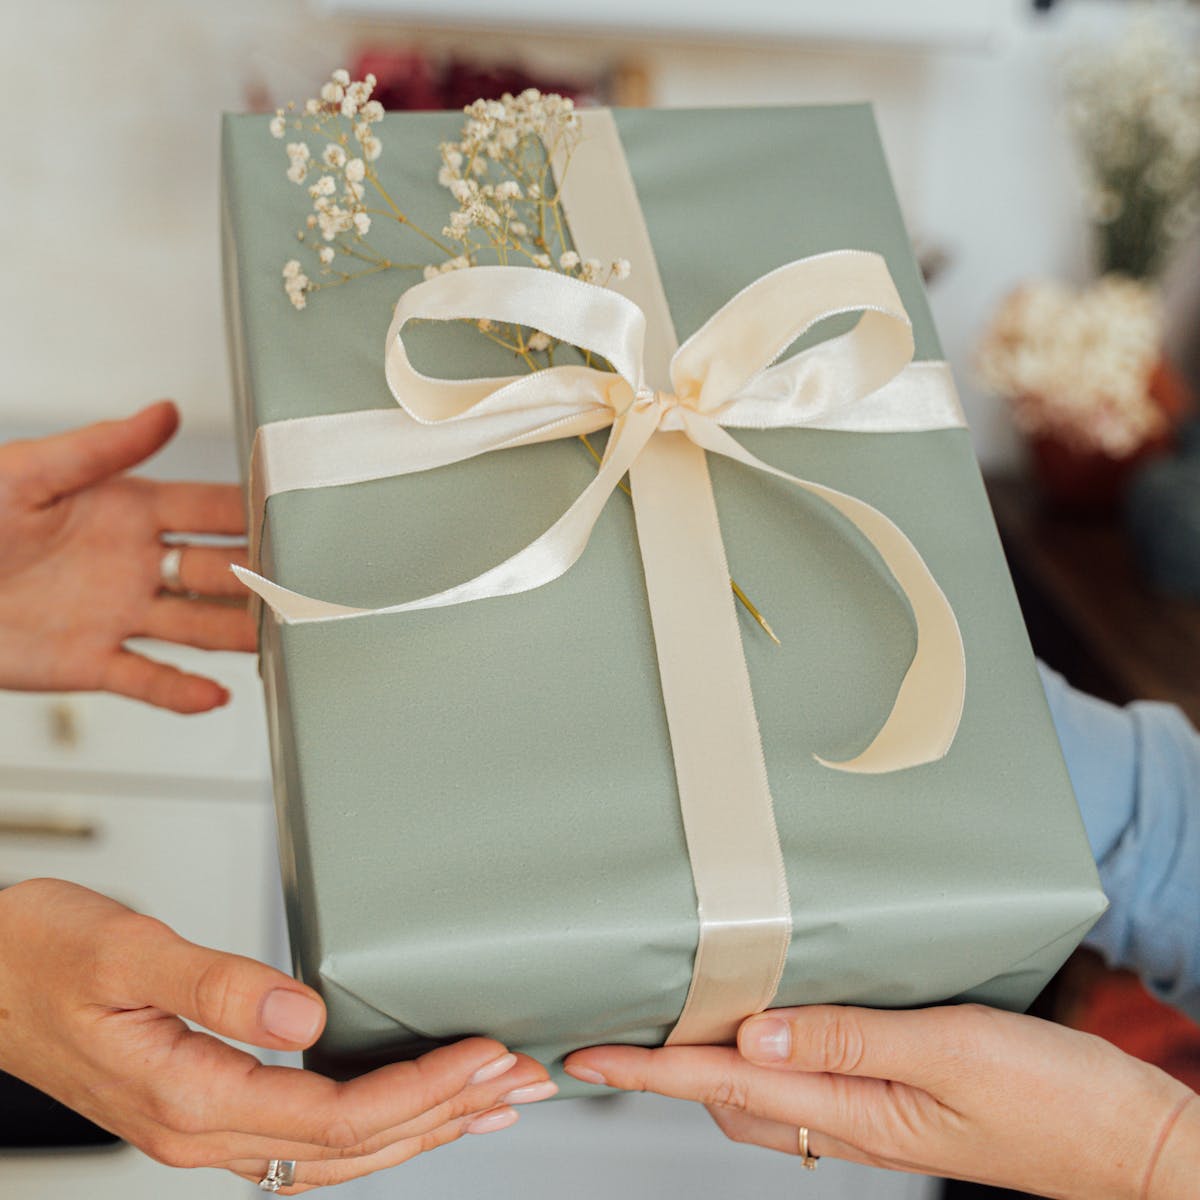 gifts for insurance agents, gifting ideas for insurance agents